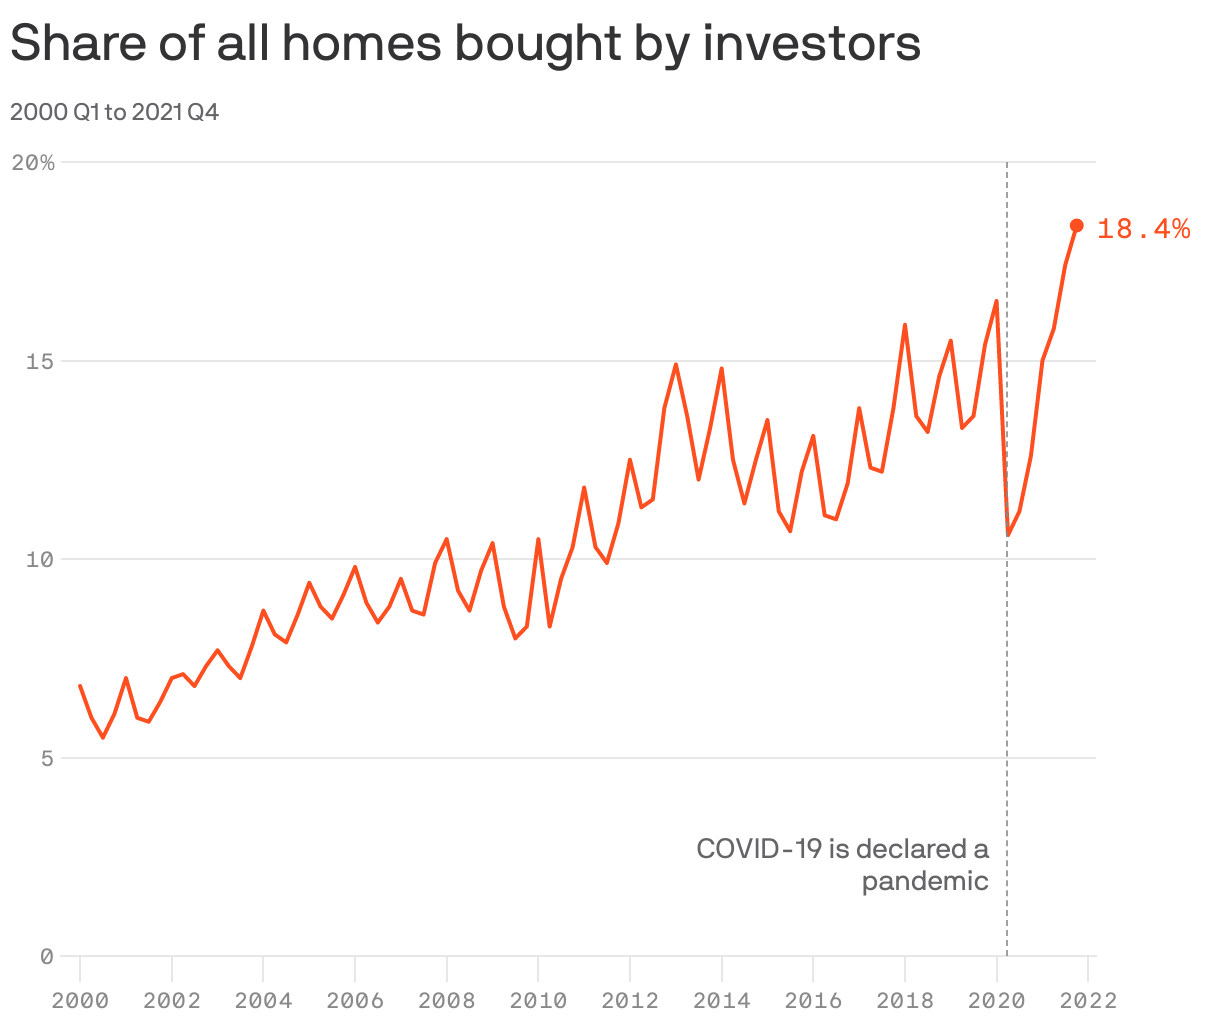 Share of all homes bought by investors